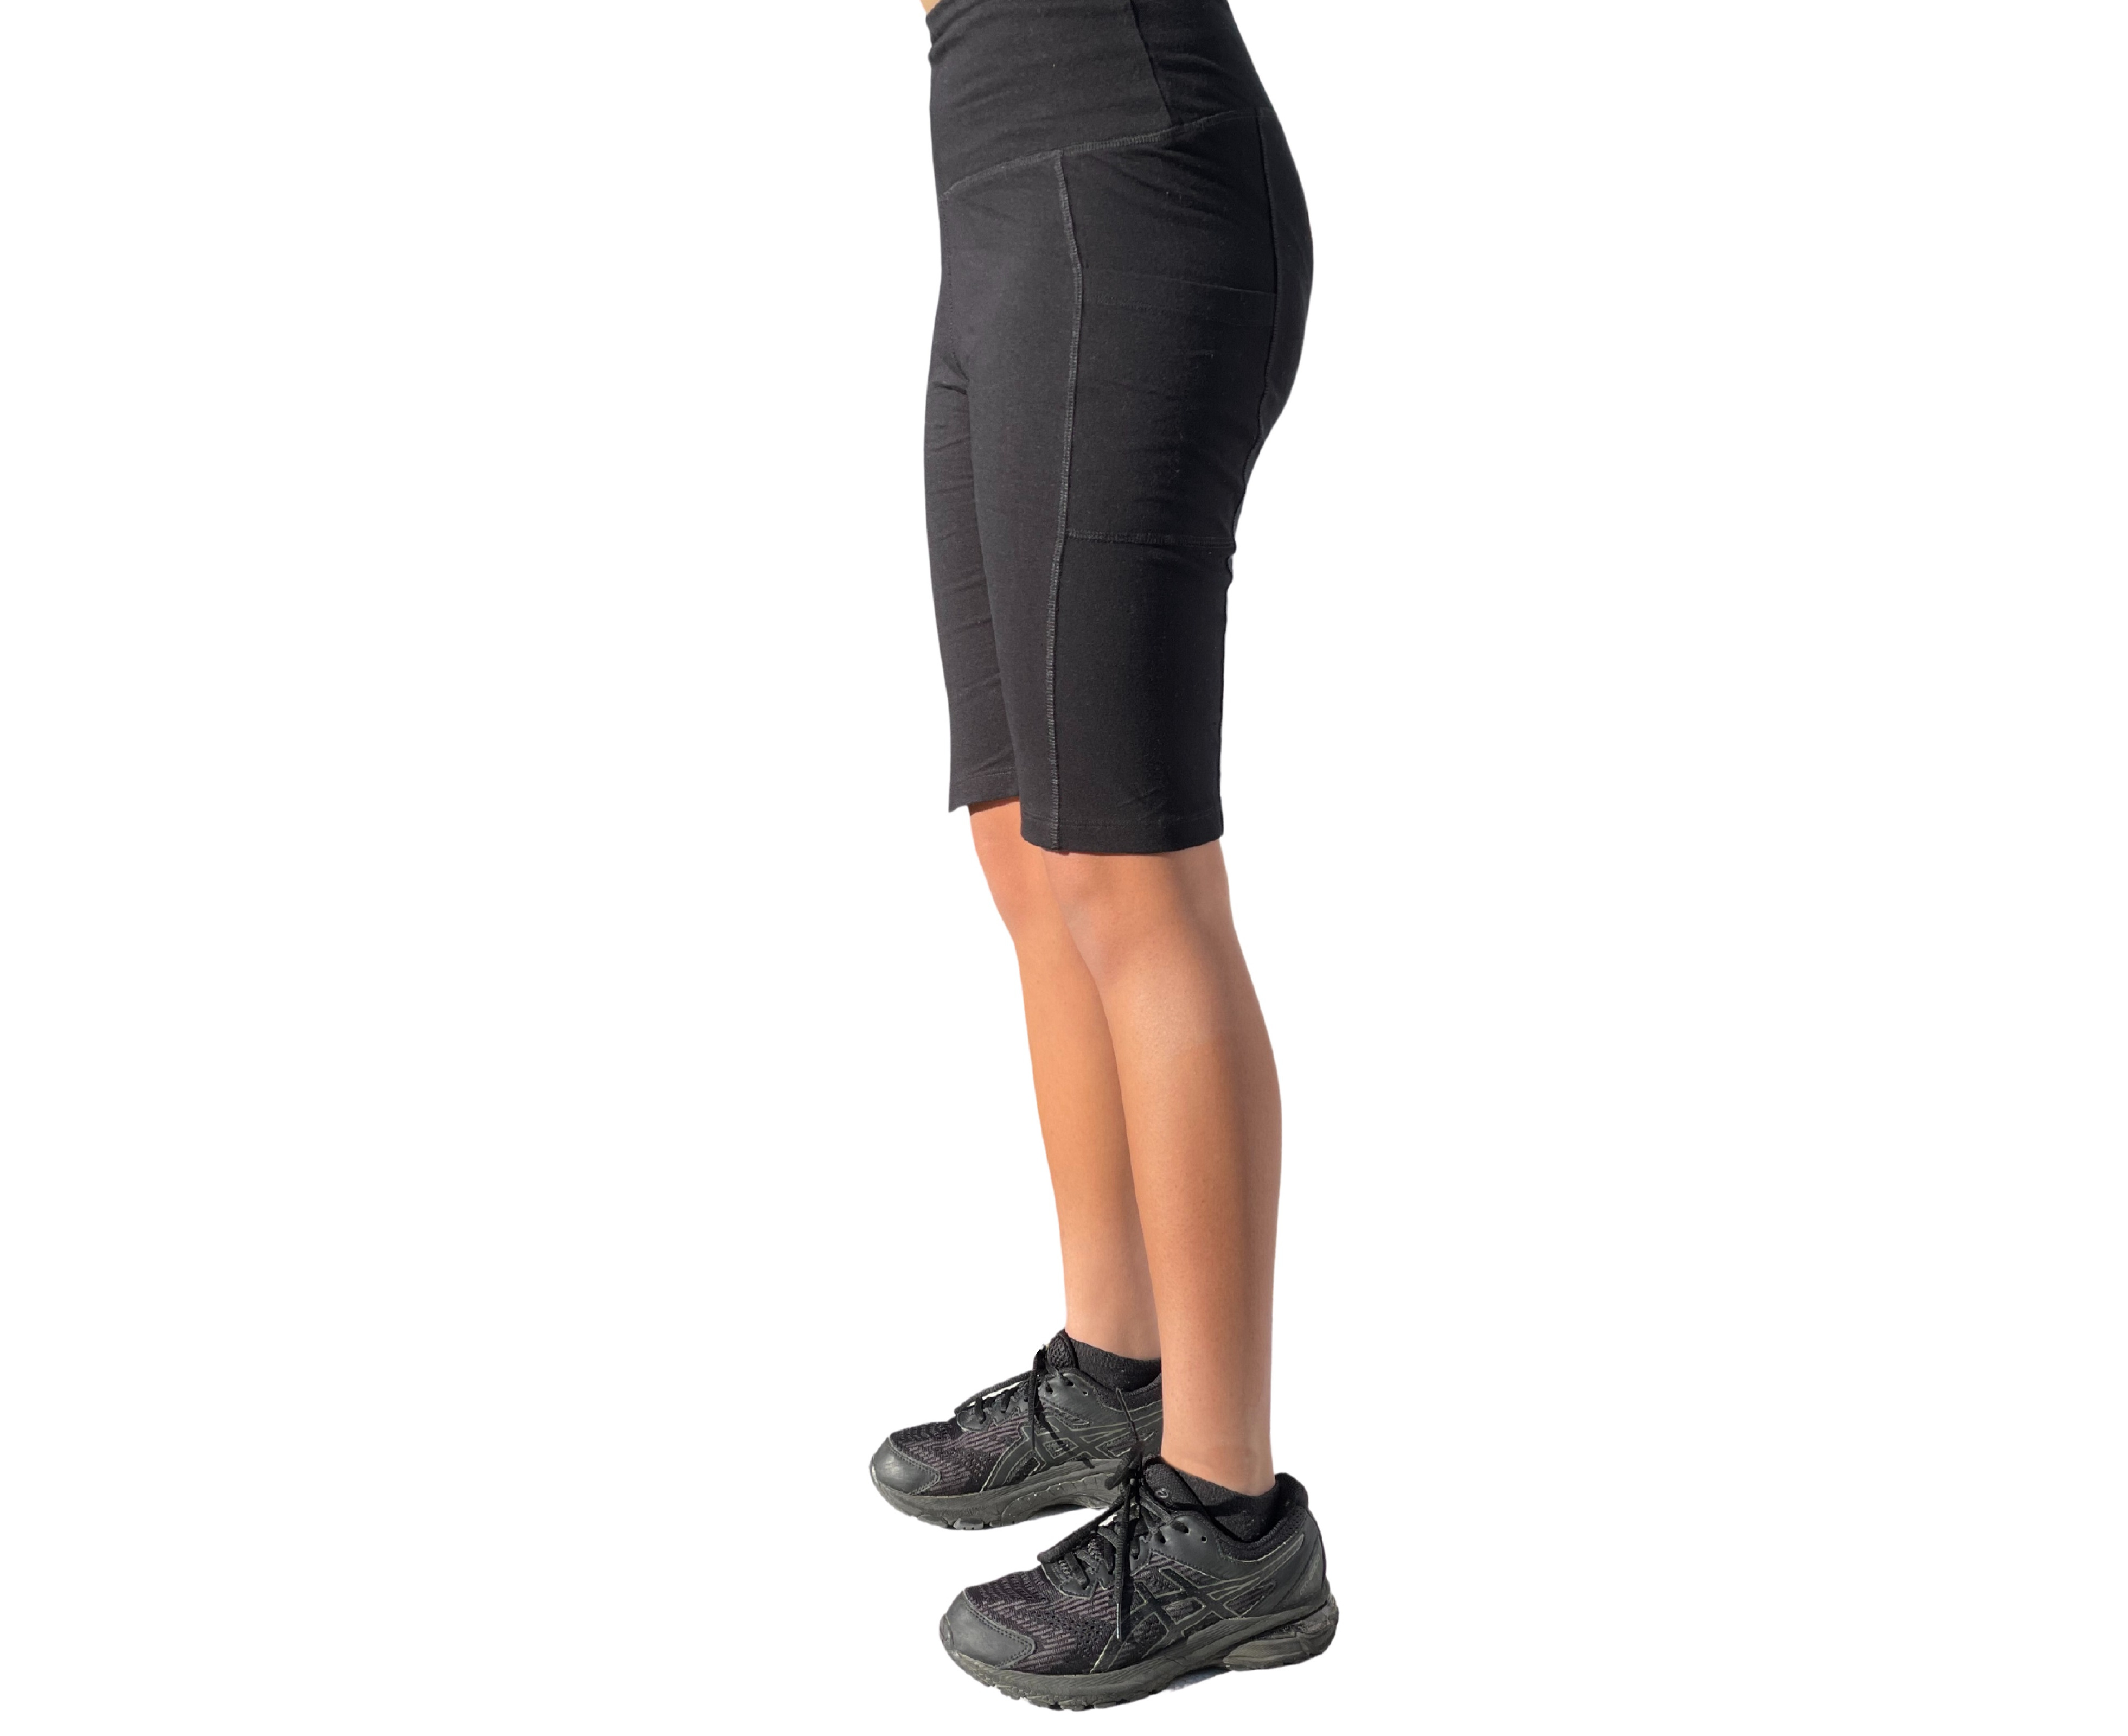 Women's Yoga Shorts with Pockets - High Waist Biker Running Compression  Exercise - Black